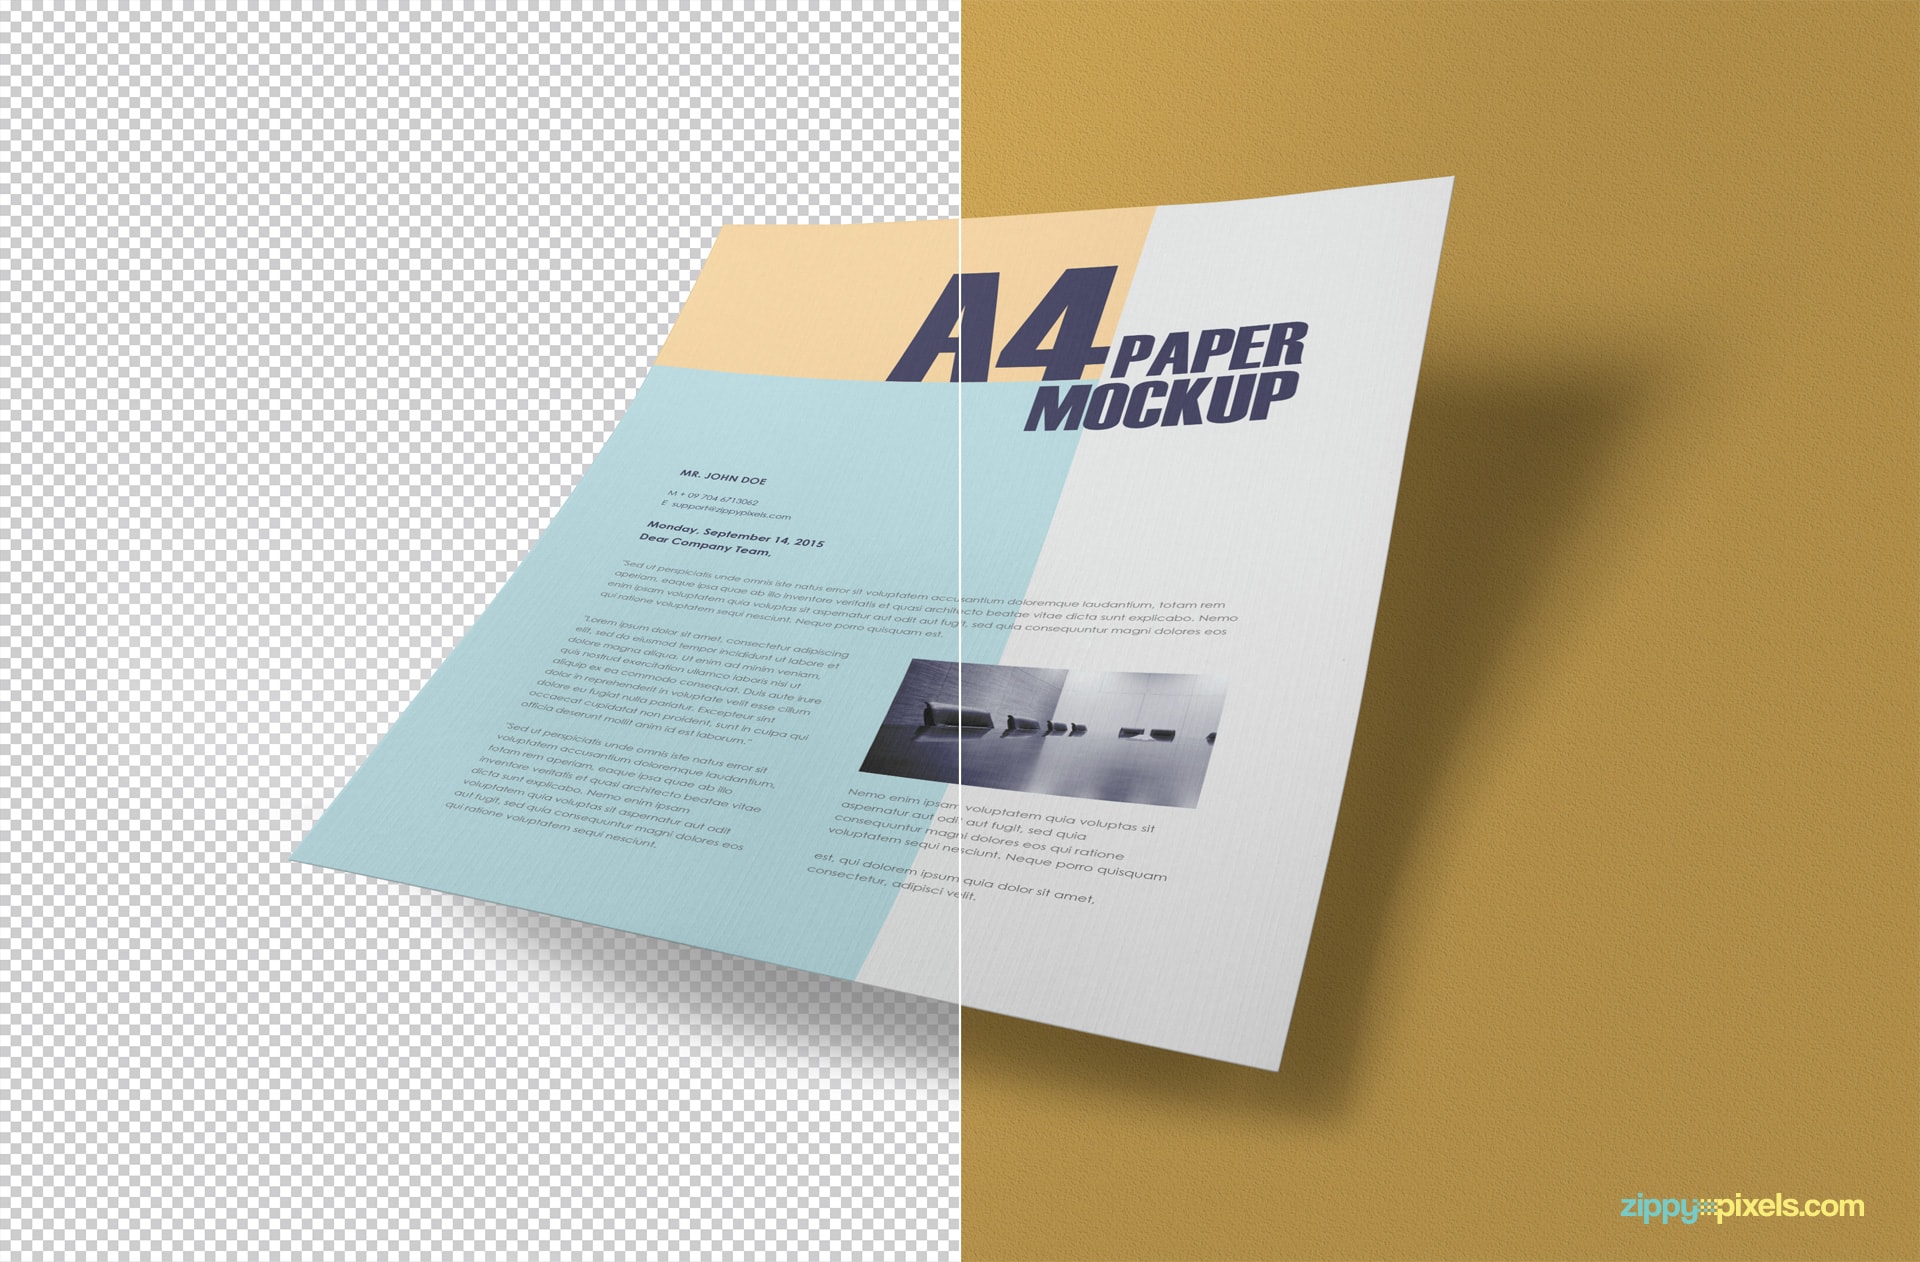 free A4 paper mockup psd in potrait view